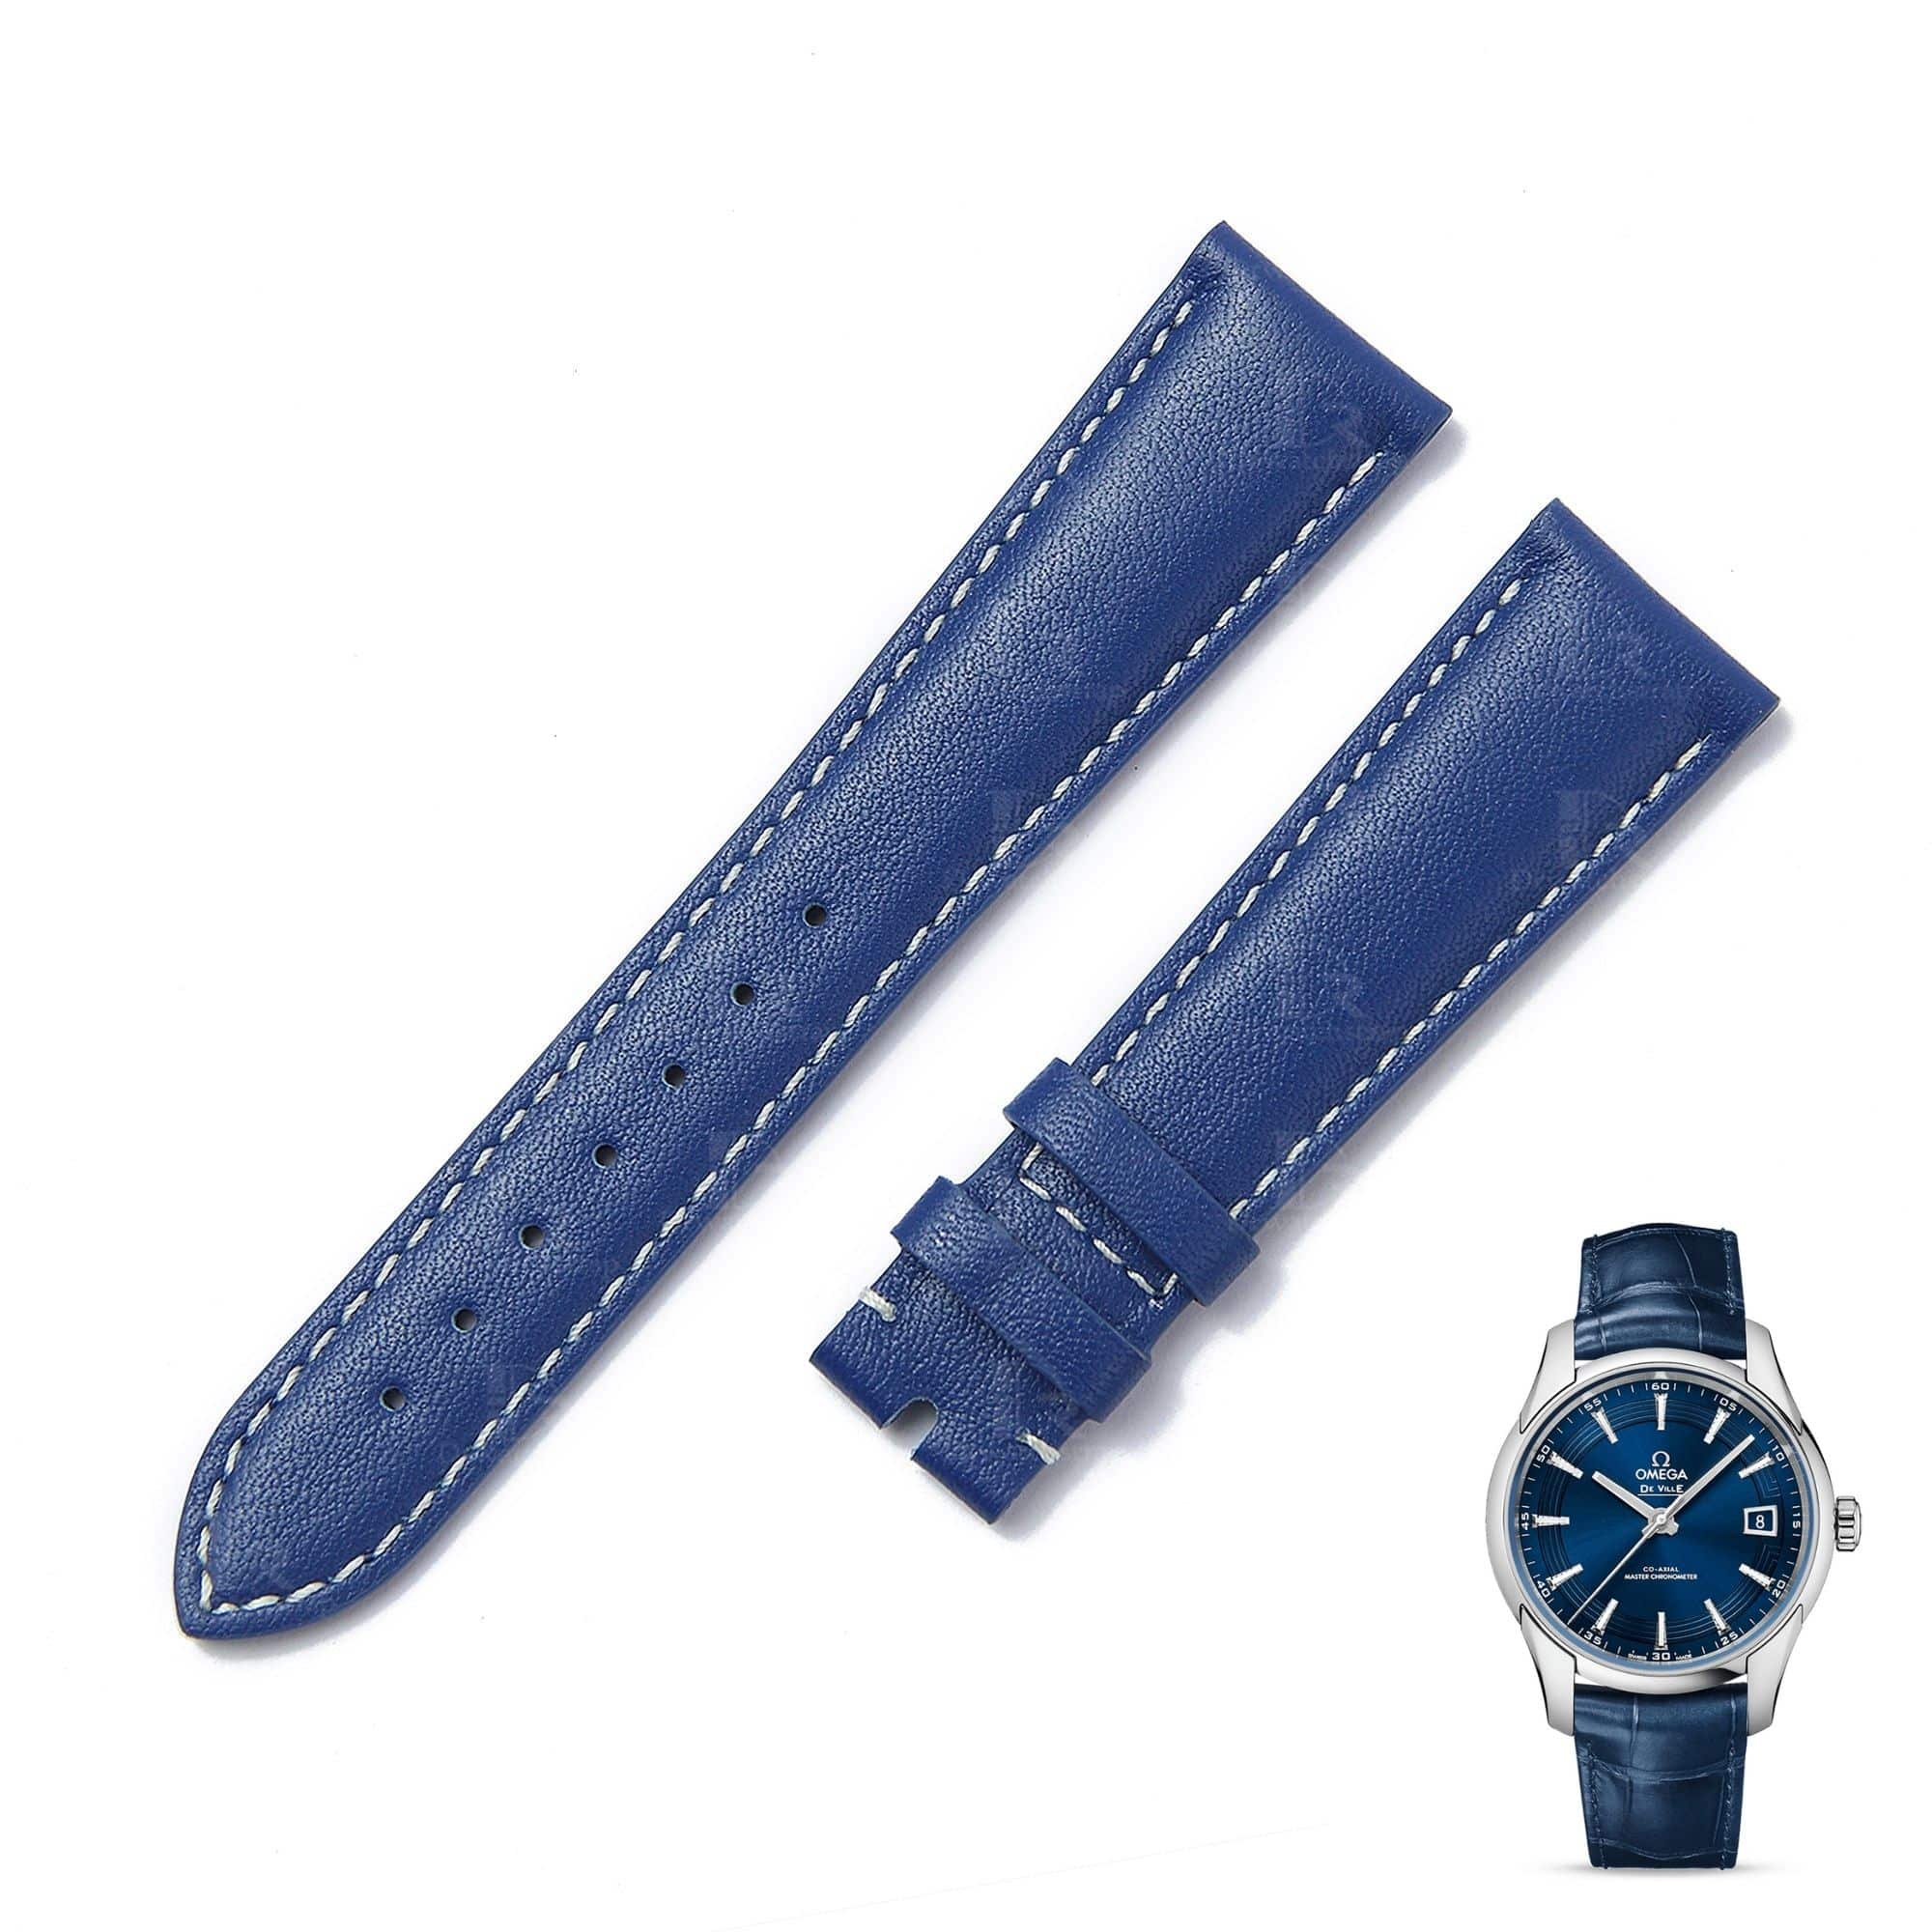 Premium calfskin Omega deville strap replacement the best quality Omega leather watch band 20mm blue watch straps ladies women men